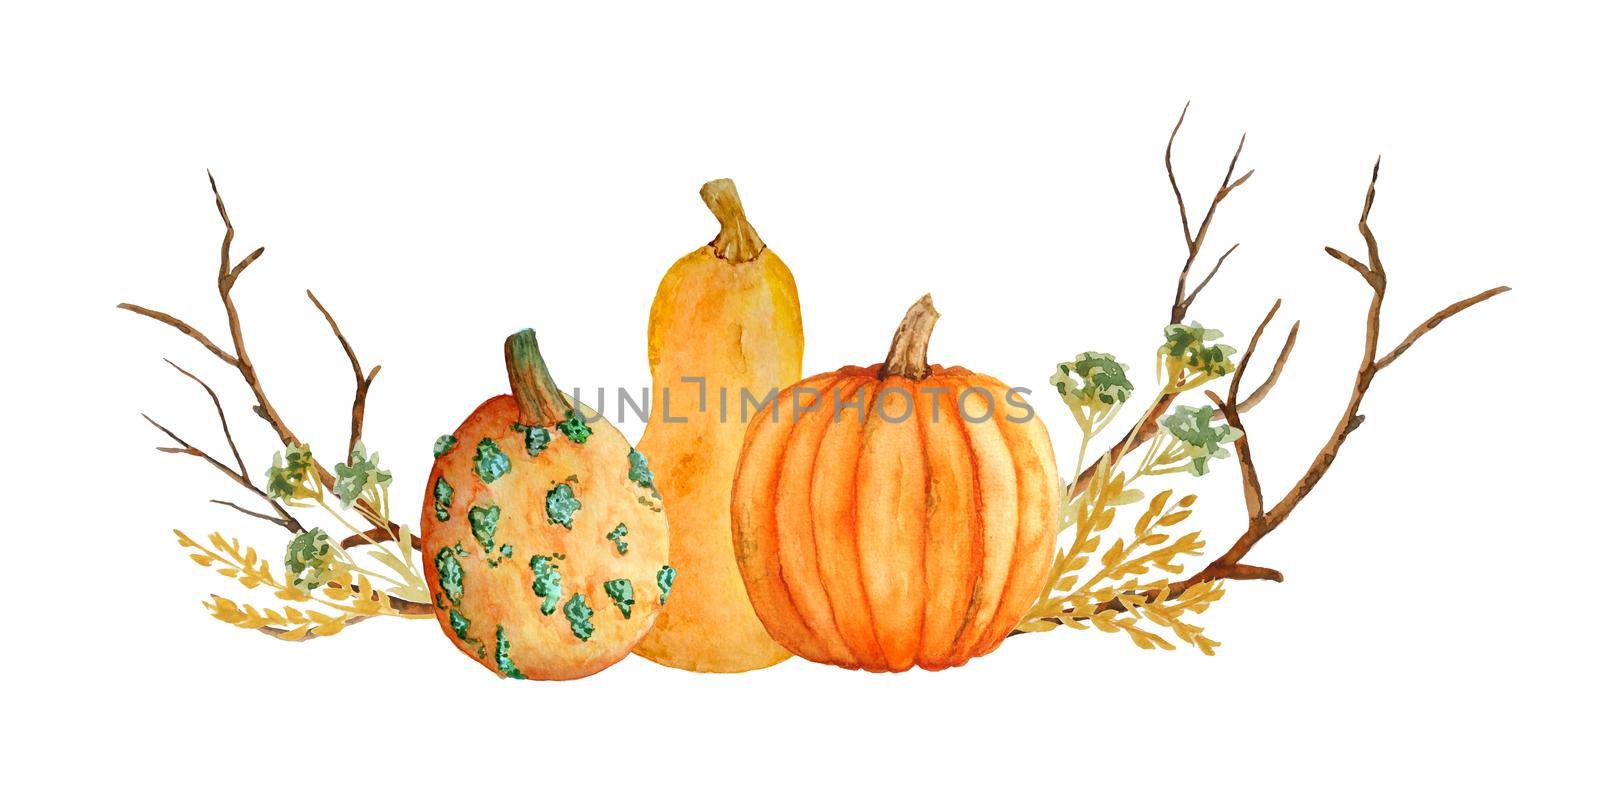 Watercolor hand drawn composition illustration of orange yellow butternut pumpkins, wood forest leaves and brown branches. For Halloween thanksgiving design in soft minimalism elegant style, woodland nature. by Lagmar